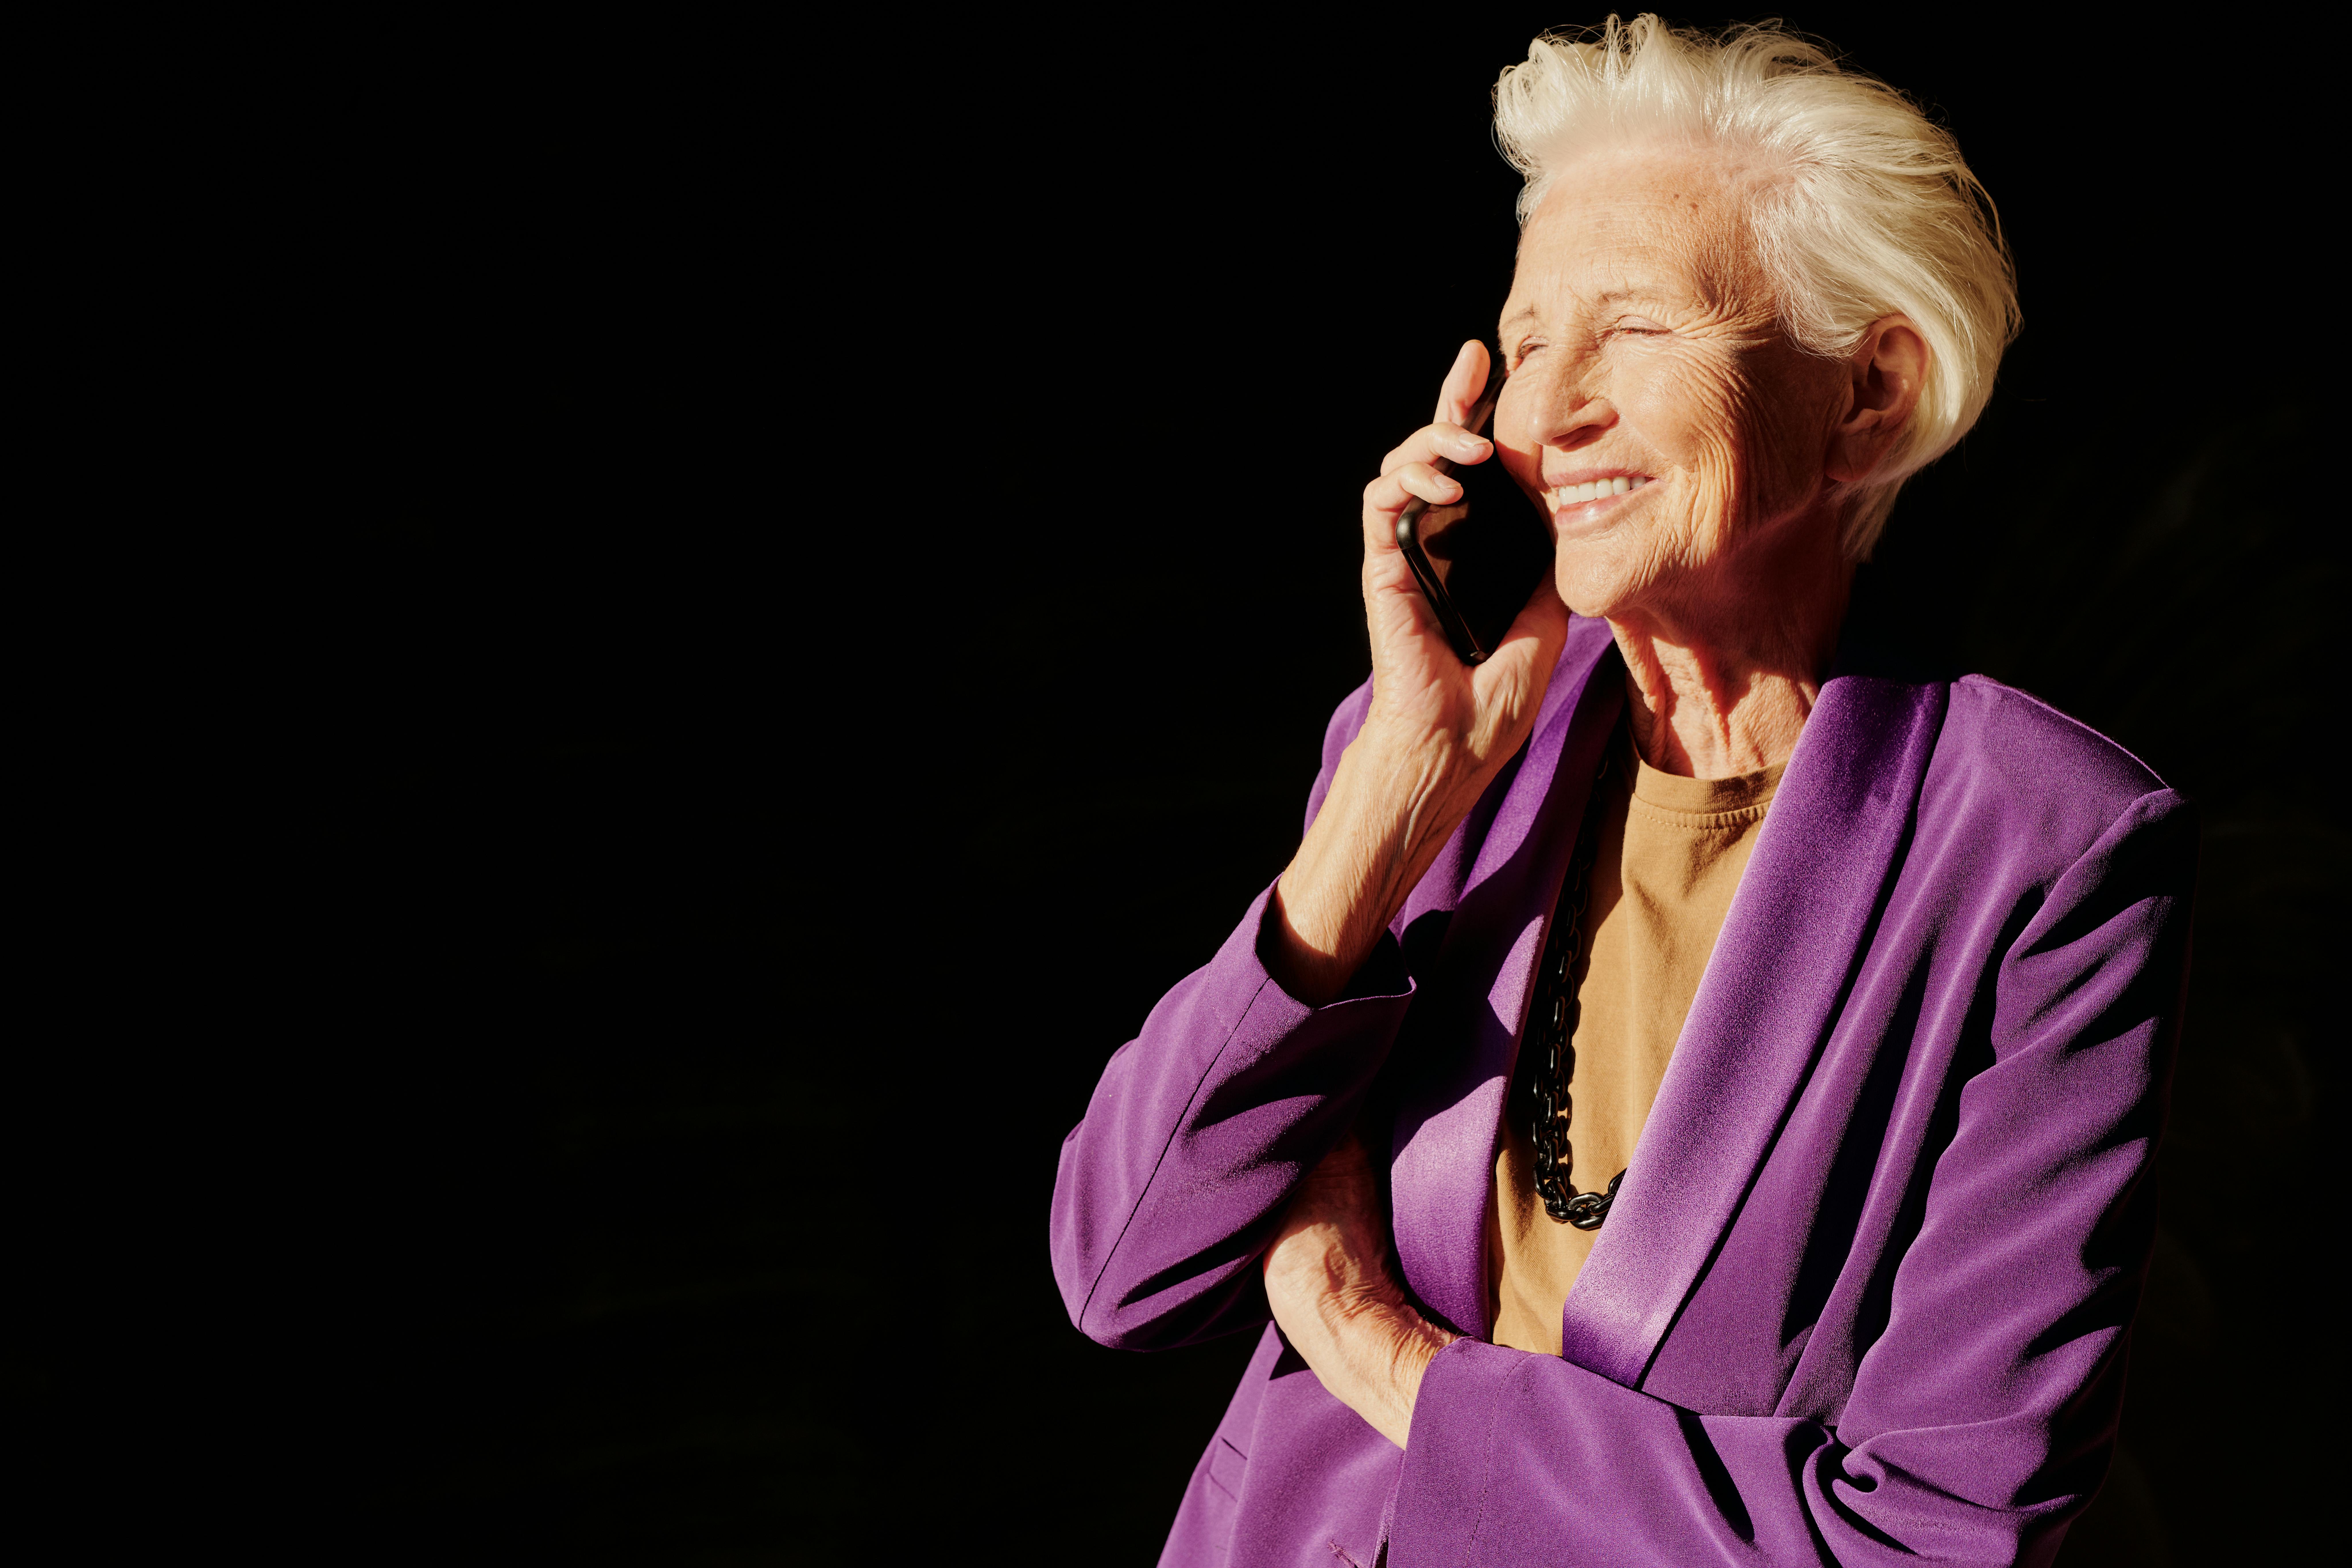 A smiling senior woman on a phone call | Source: Pexels